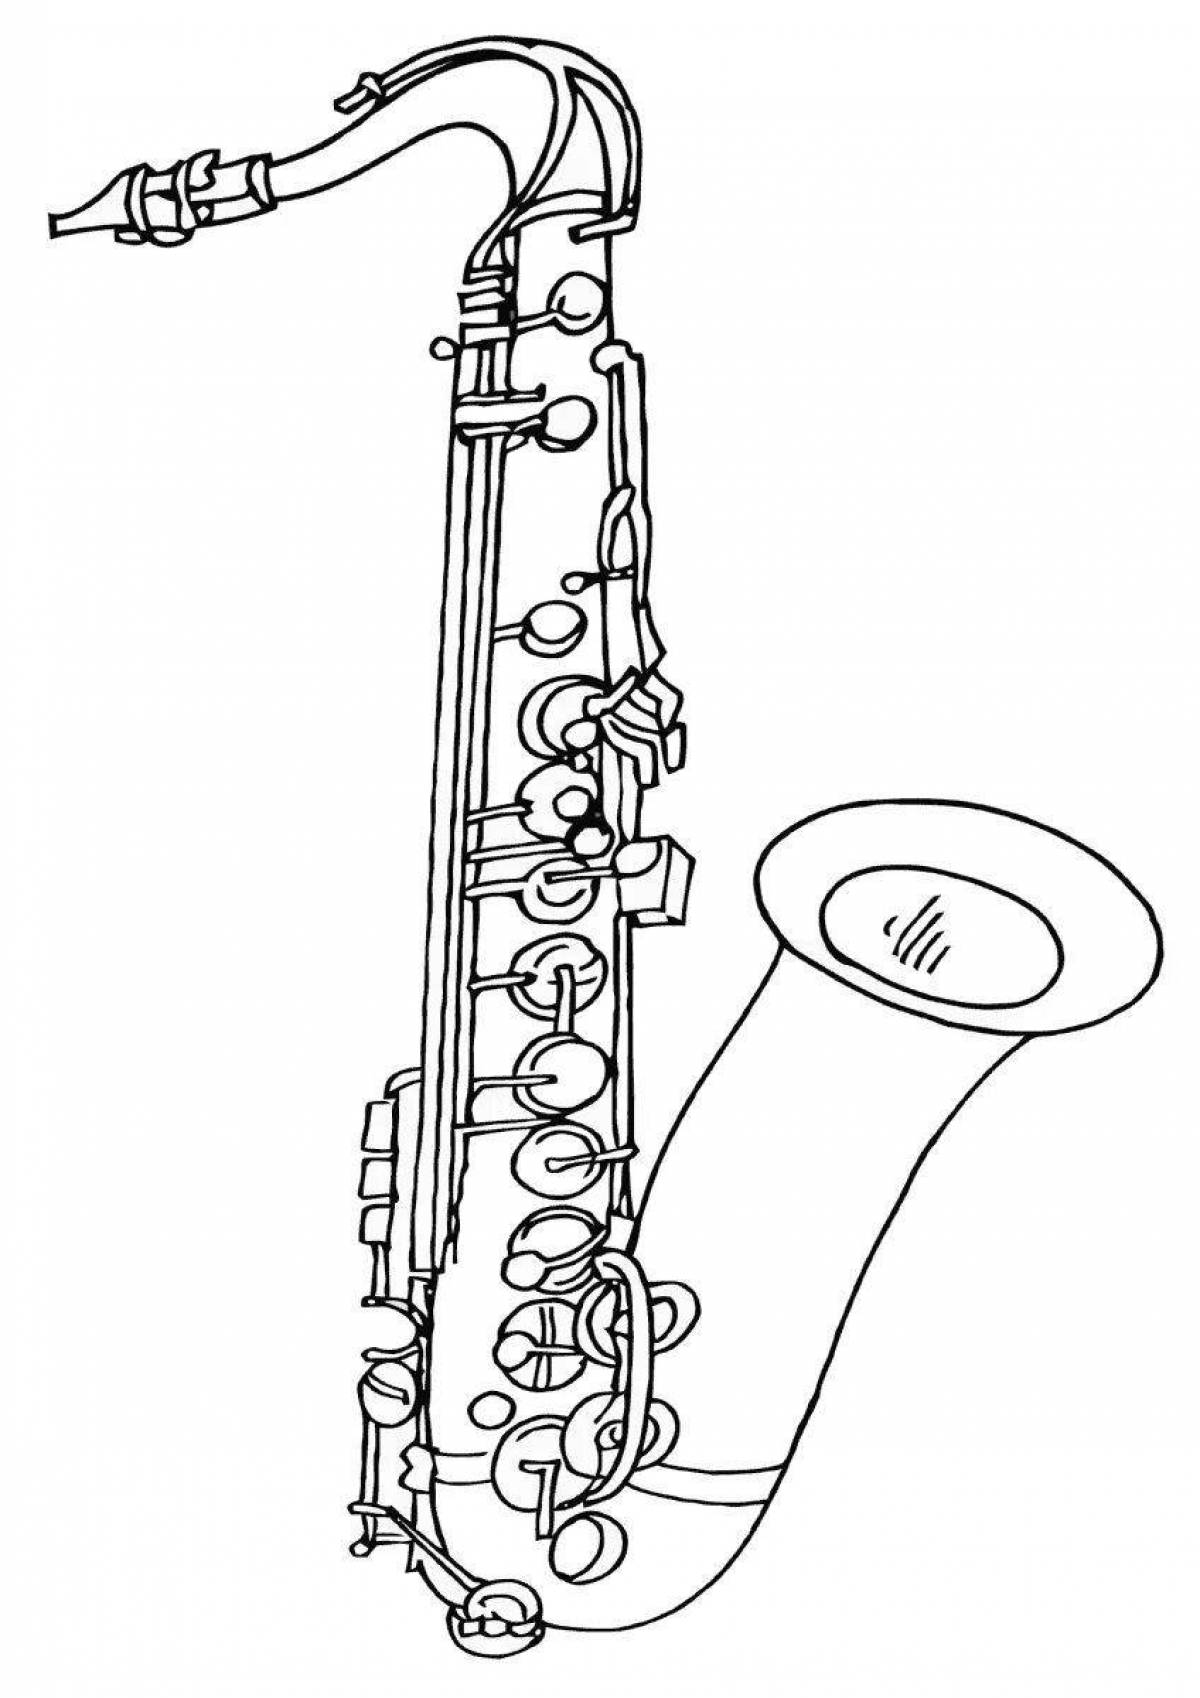 Exciting saxophone coloring book